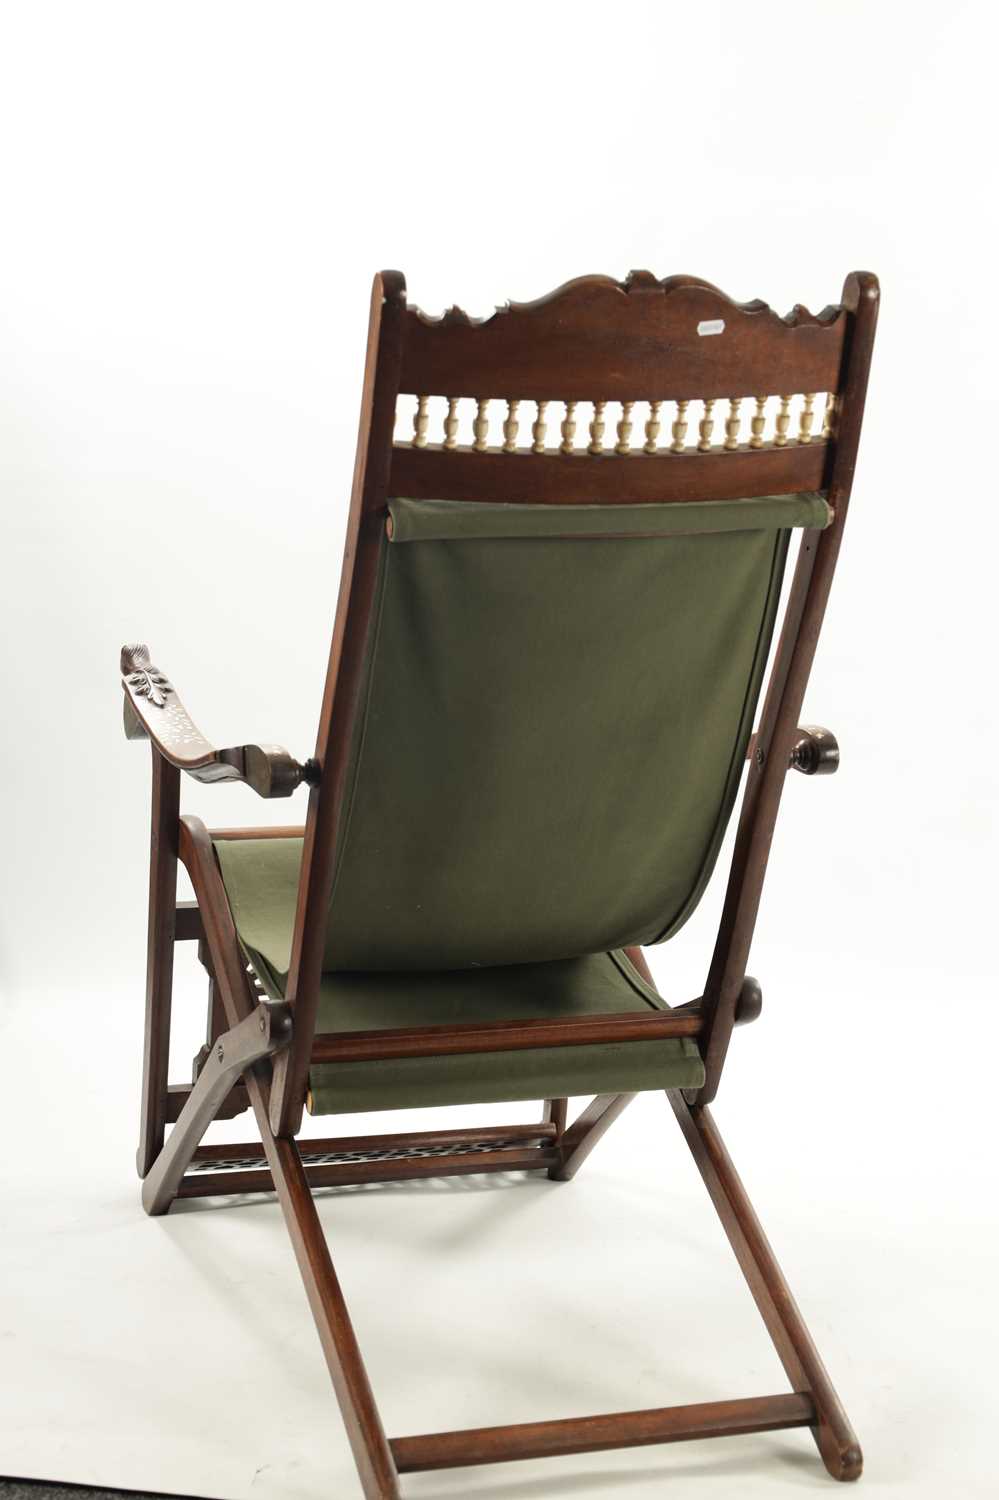 A LATE 19TH CENTURY ANGLO INDIAN IVORY INLAID HARDWOOD FOLDING CHAIR - Image 5 of 7